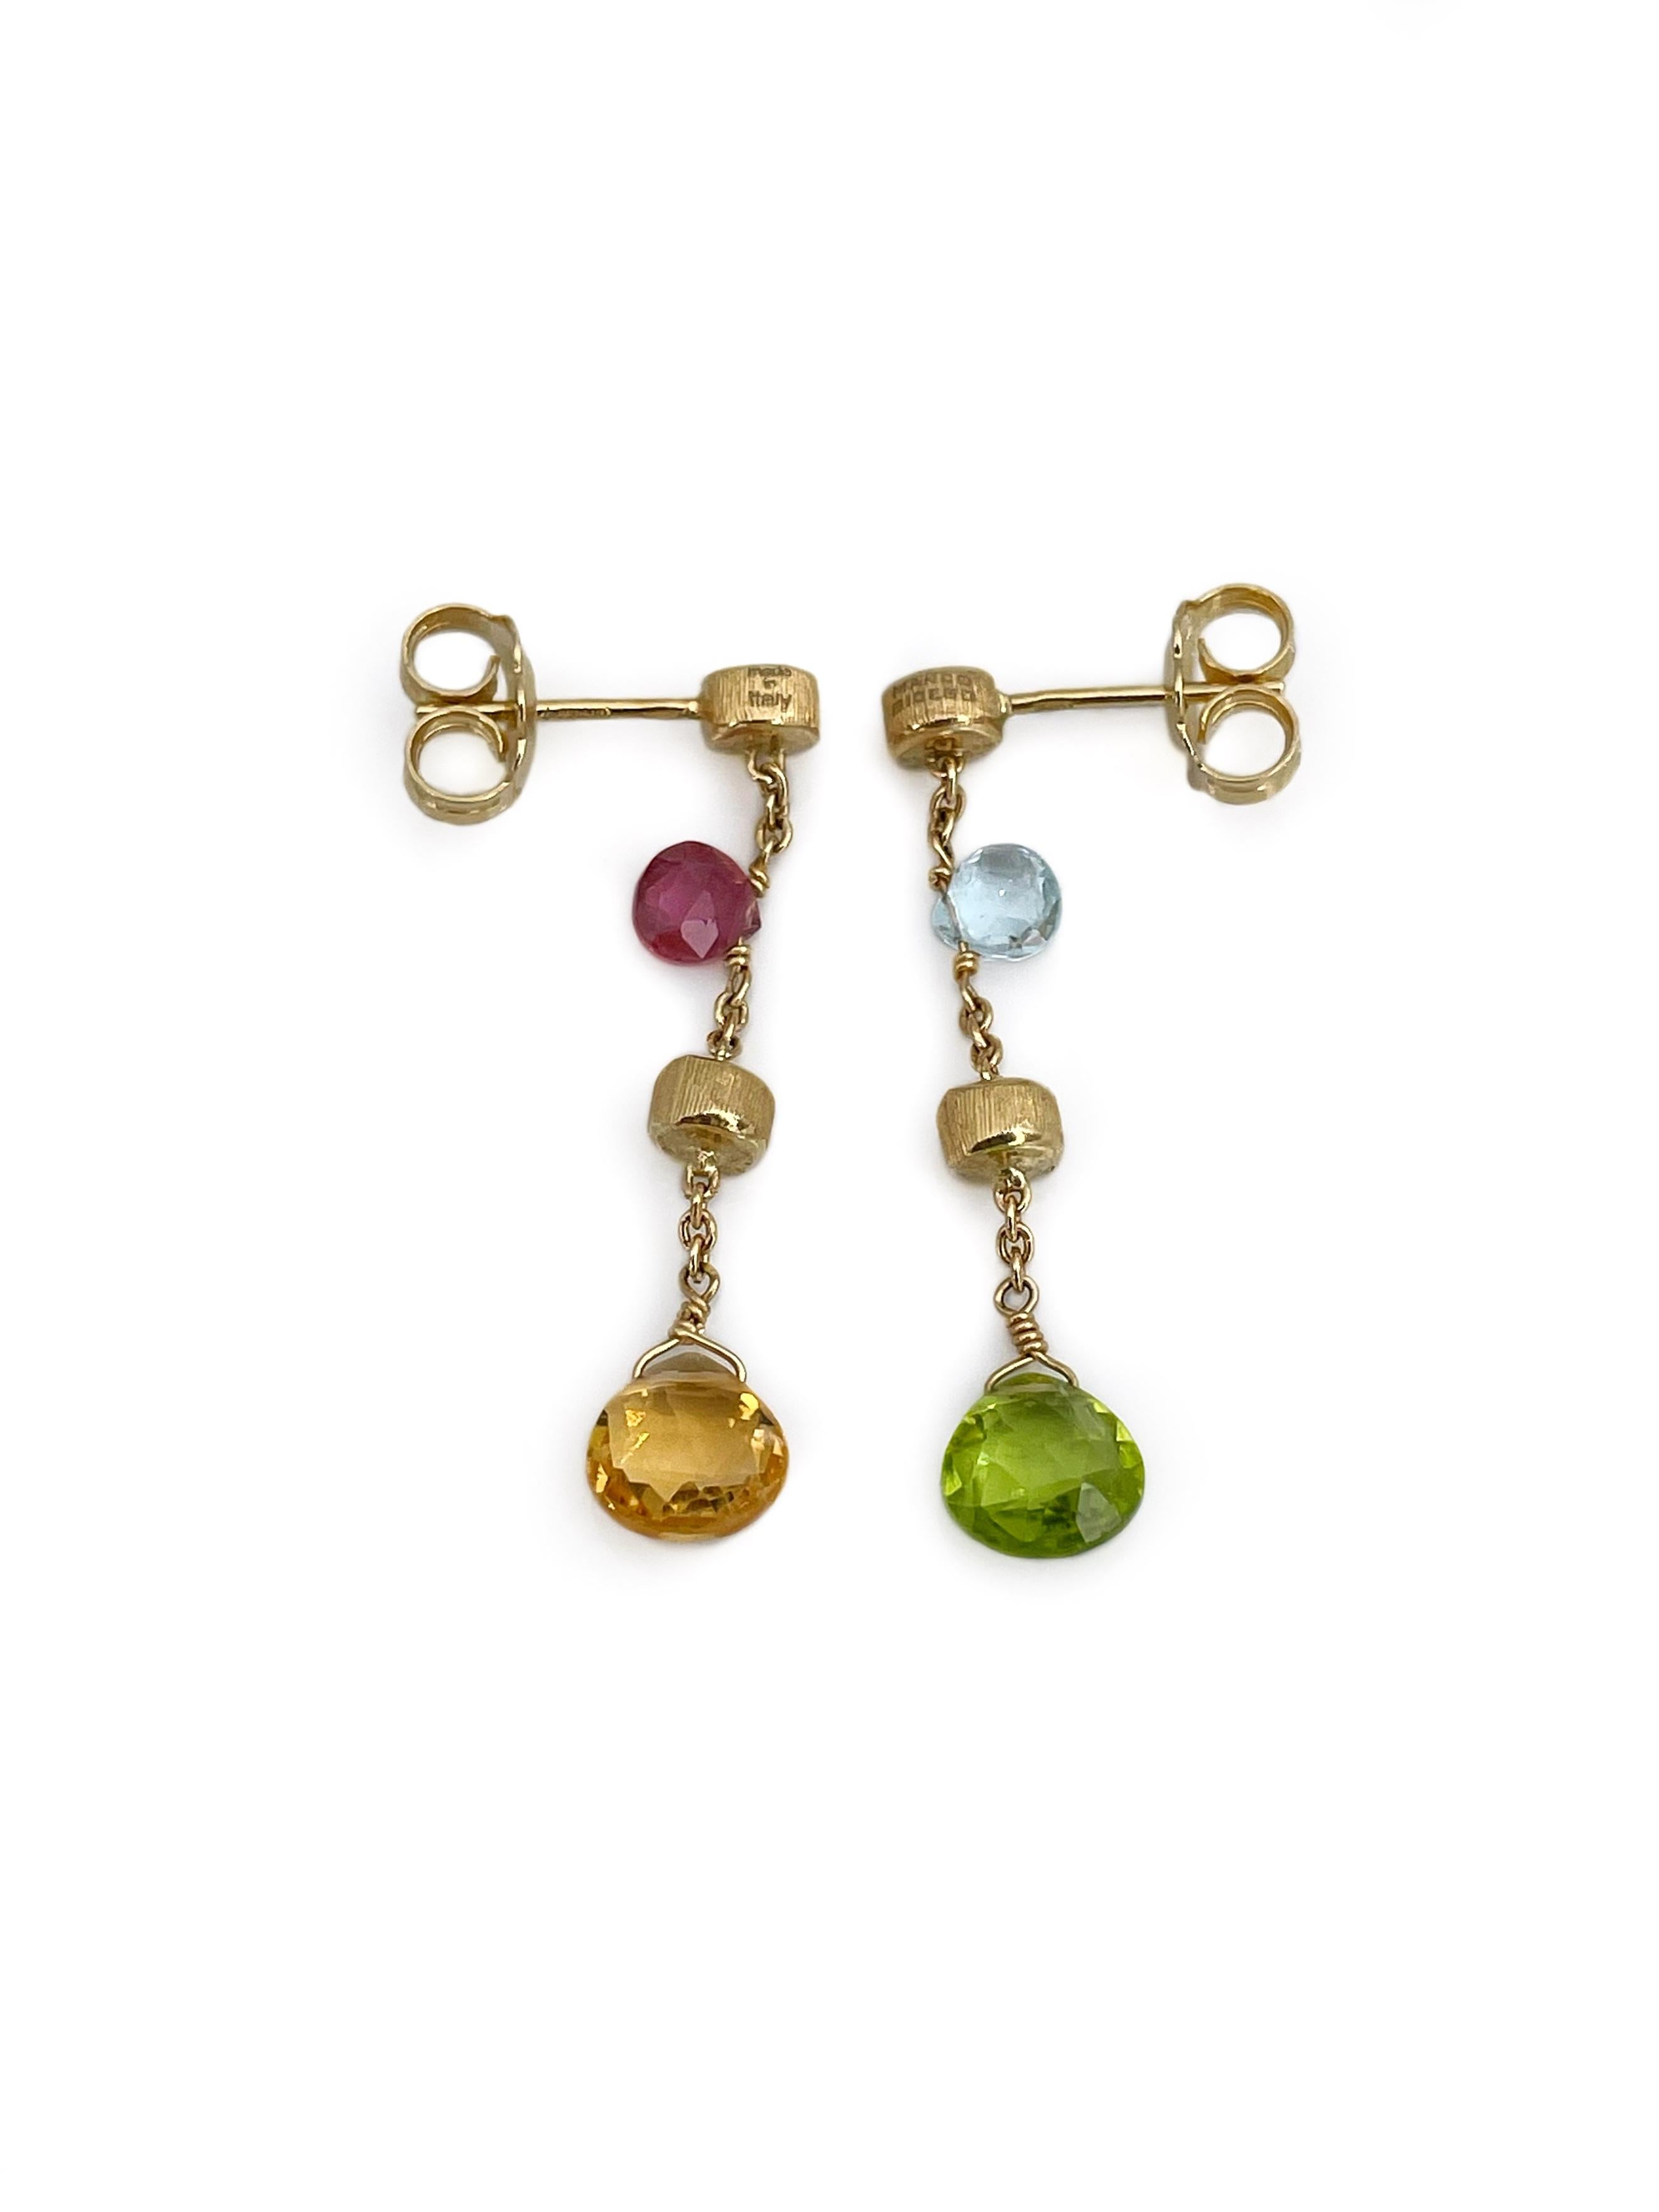 This is a playful pair of stud drop earrings designed by Marco Bicego in 2010s - “Paradise” collection. The piece is crafted in 18K yellow gold. It features citrine, topaz, peridot and tourmaline. 

Signed: “Marco Bicego. Made in Italy”

Size: